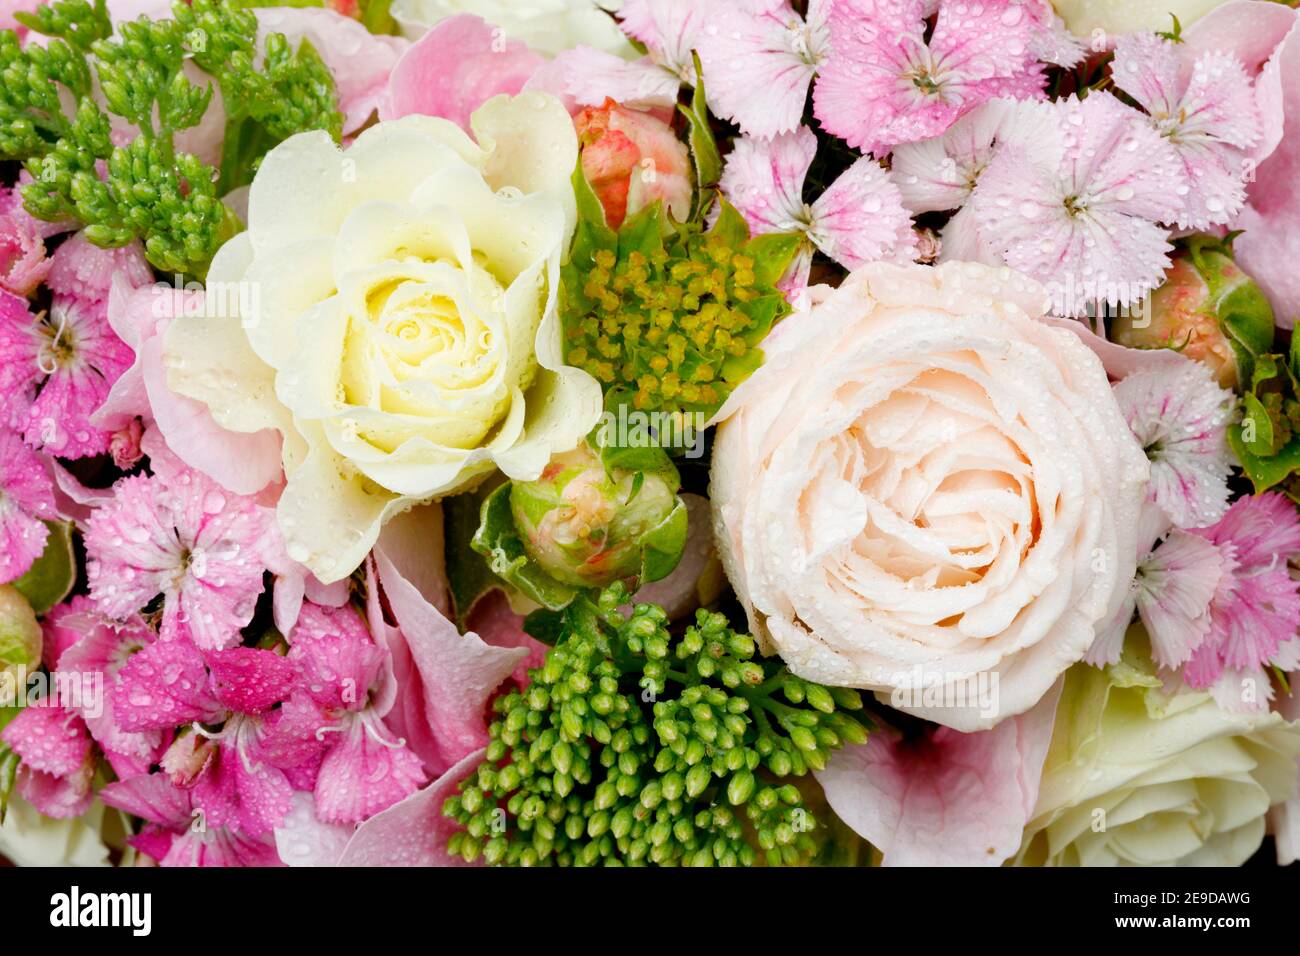 flowers girdle with roses and pinks Stock Photo